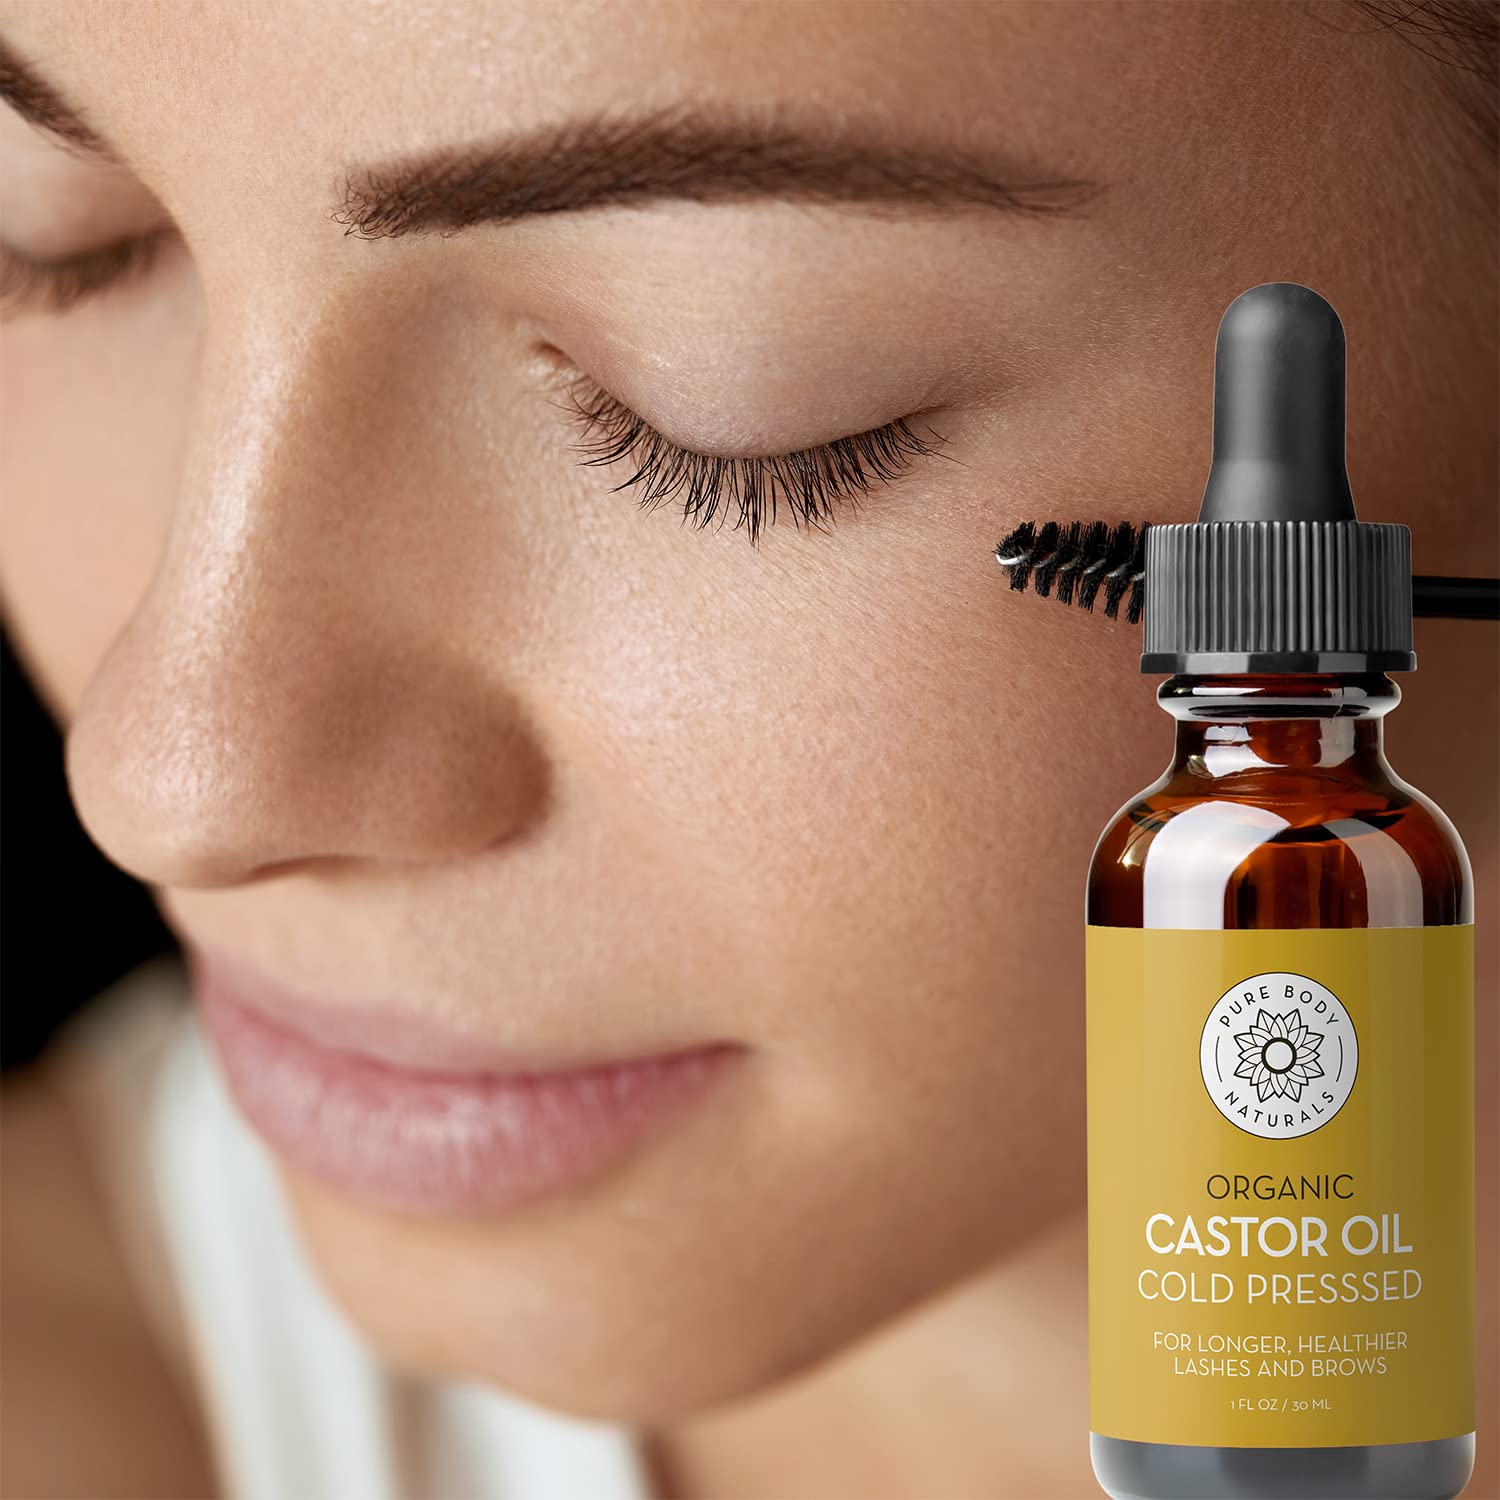 Castor Oil for Eyelashes and Eyebrows - Brow and Lash Growth Serum - Organic Hexane Free Cold Pressed Unrefined - 1 fl oz - Pure Body Naturals